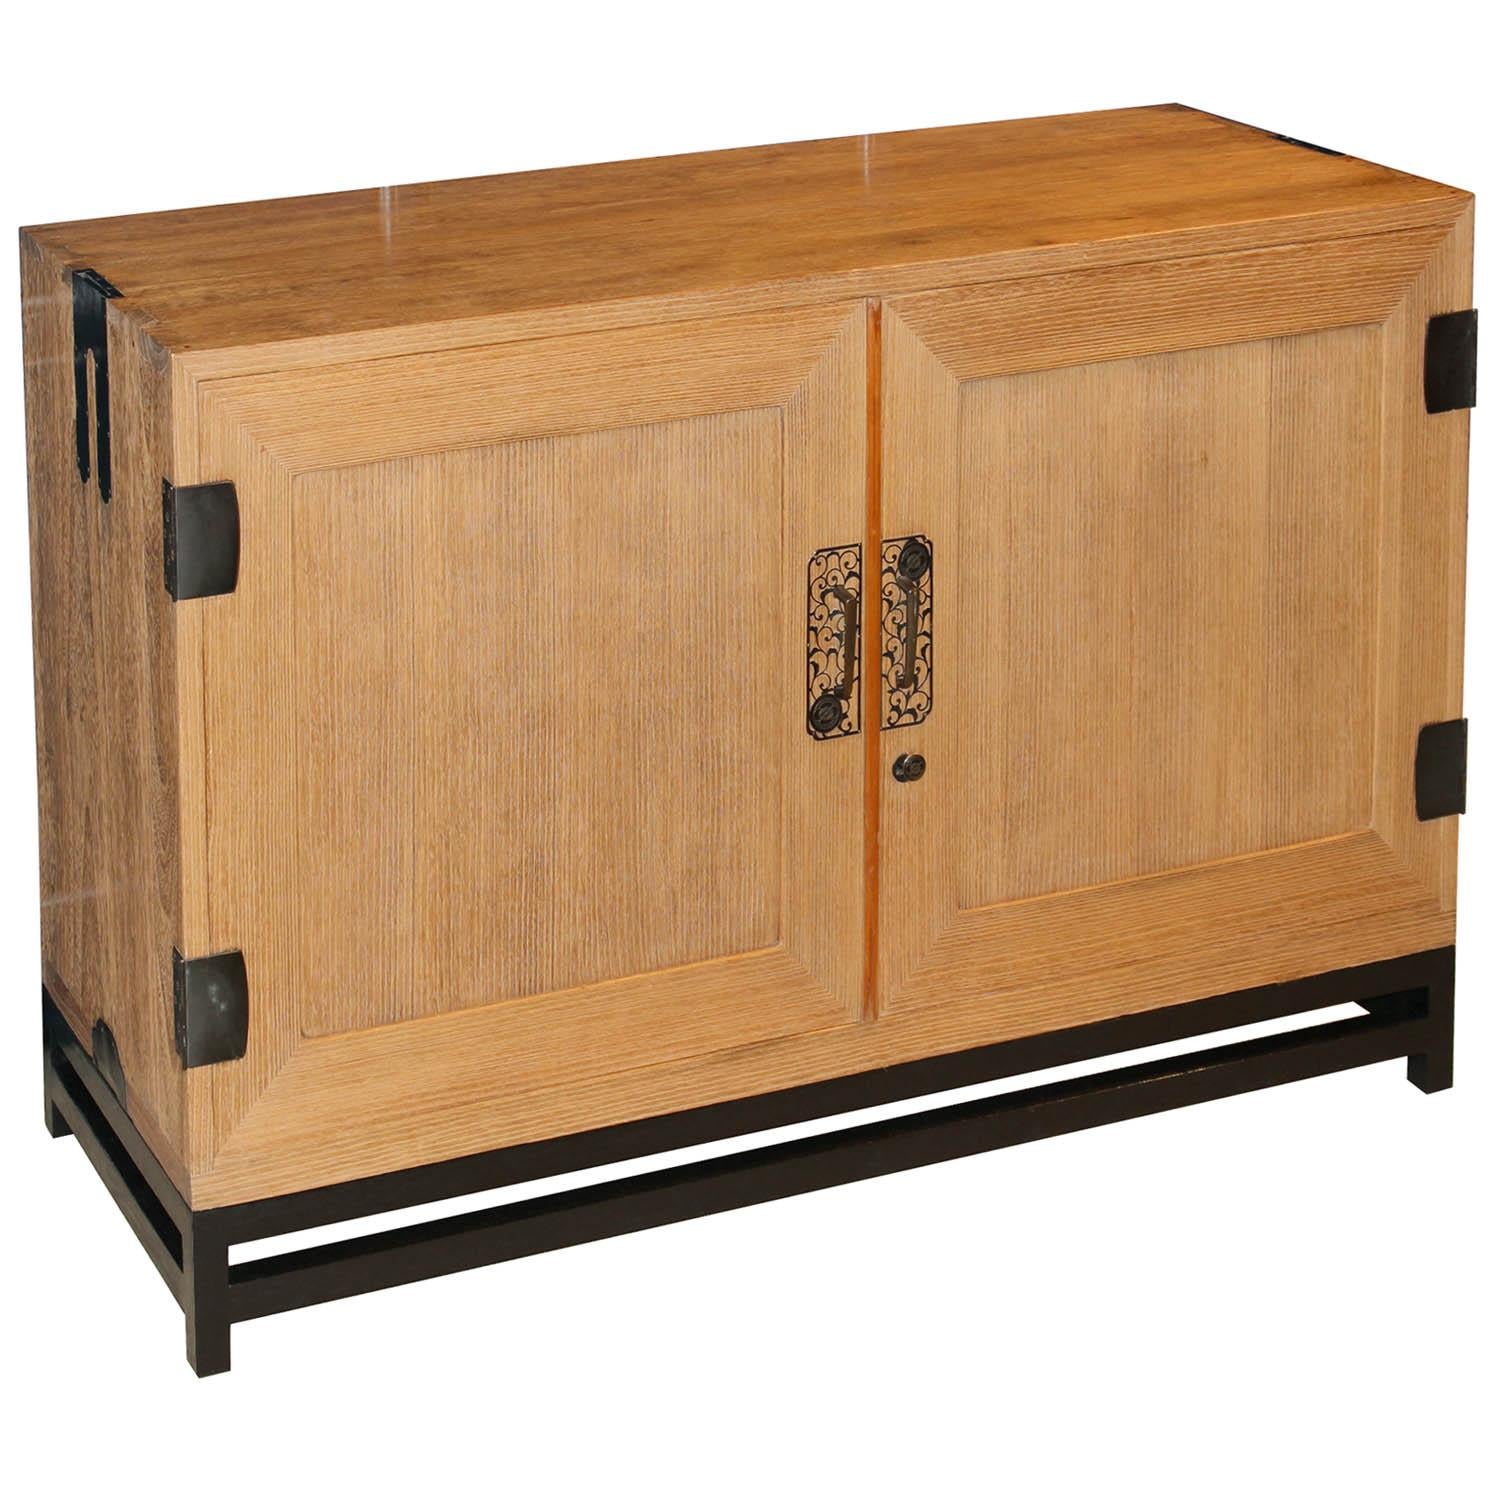 Taisho period, circa 1920s, solid kiriwood kimono chest with sliding trays. With beautiful wood grain and copper hardware, featuring chrysanthemum lockplates, was used to store kimonos. Originally the middle portion of a three-section clothing